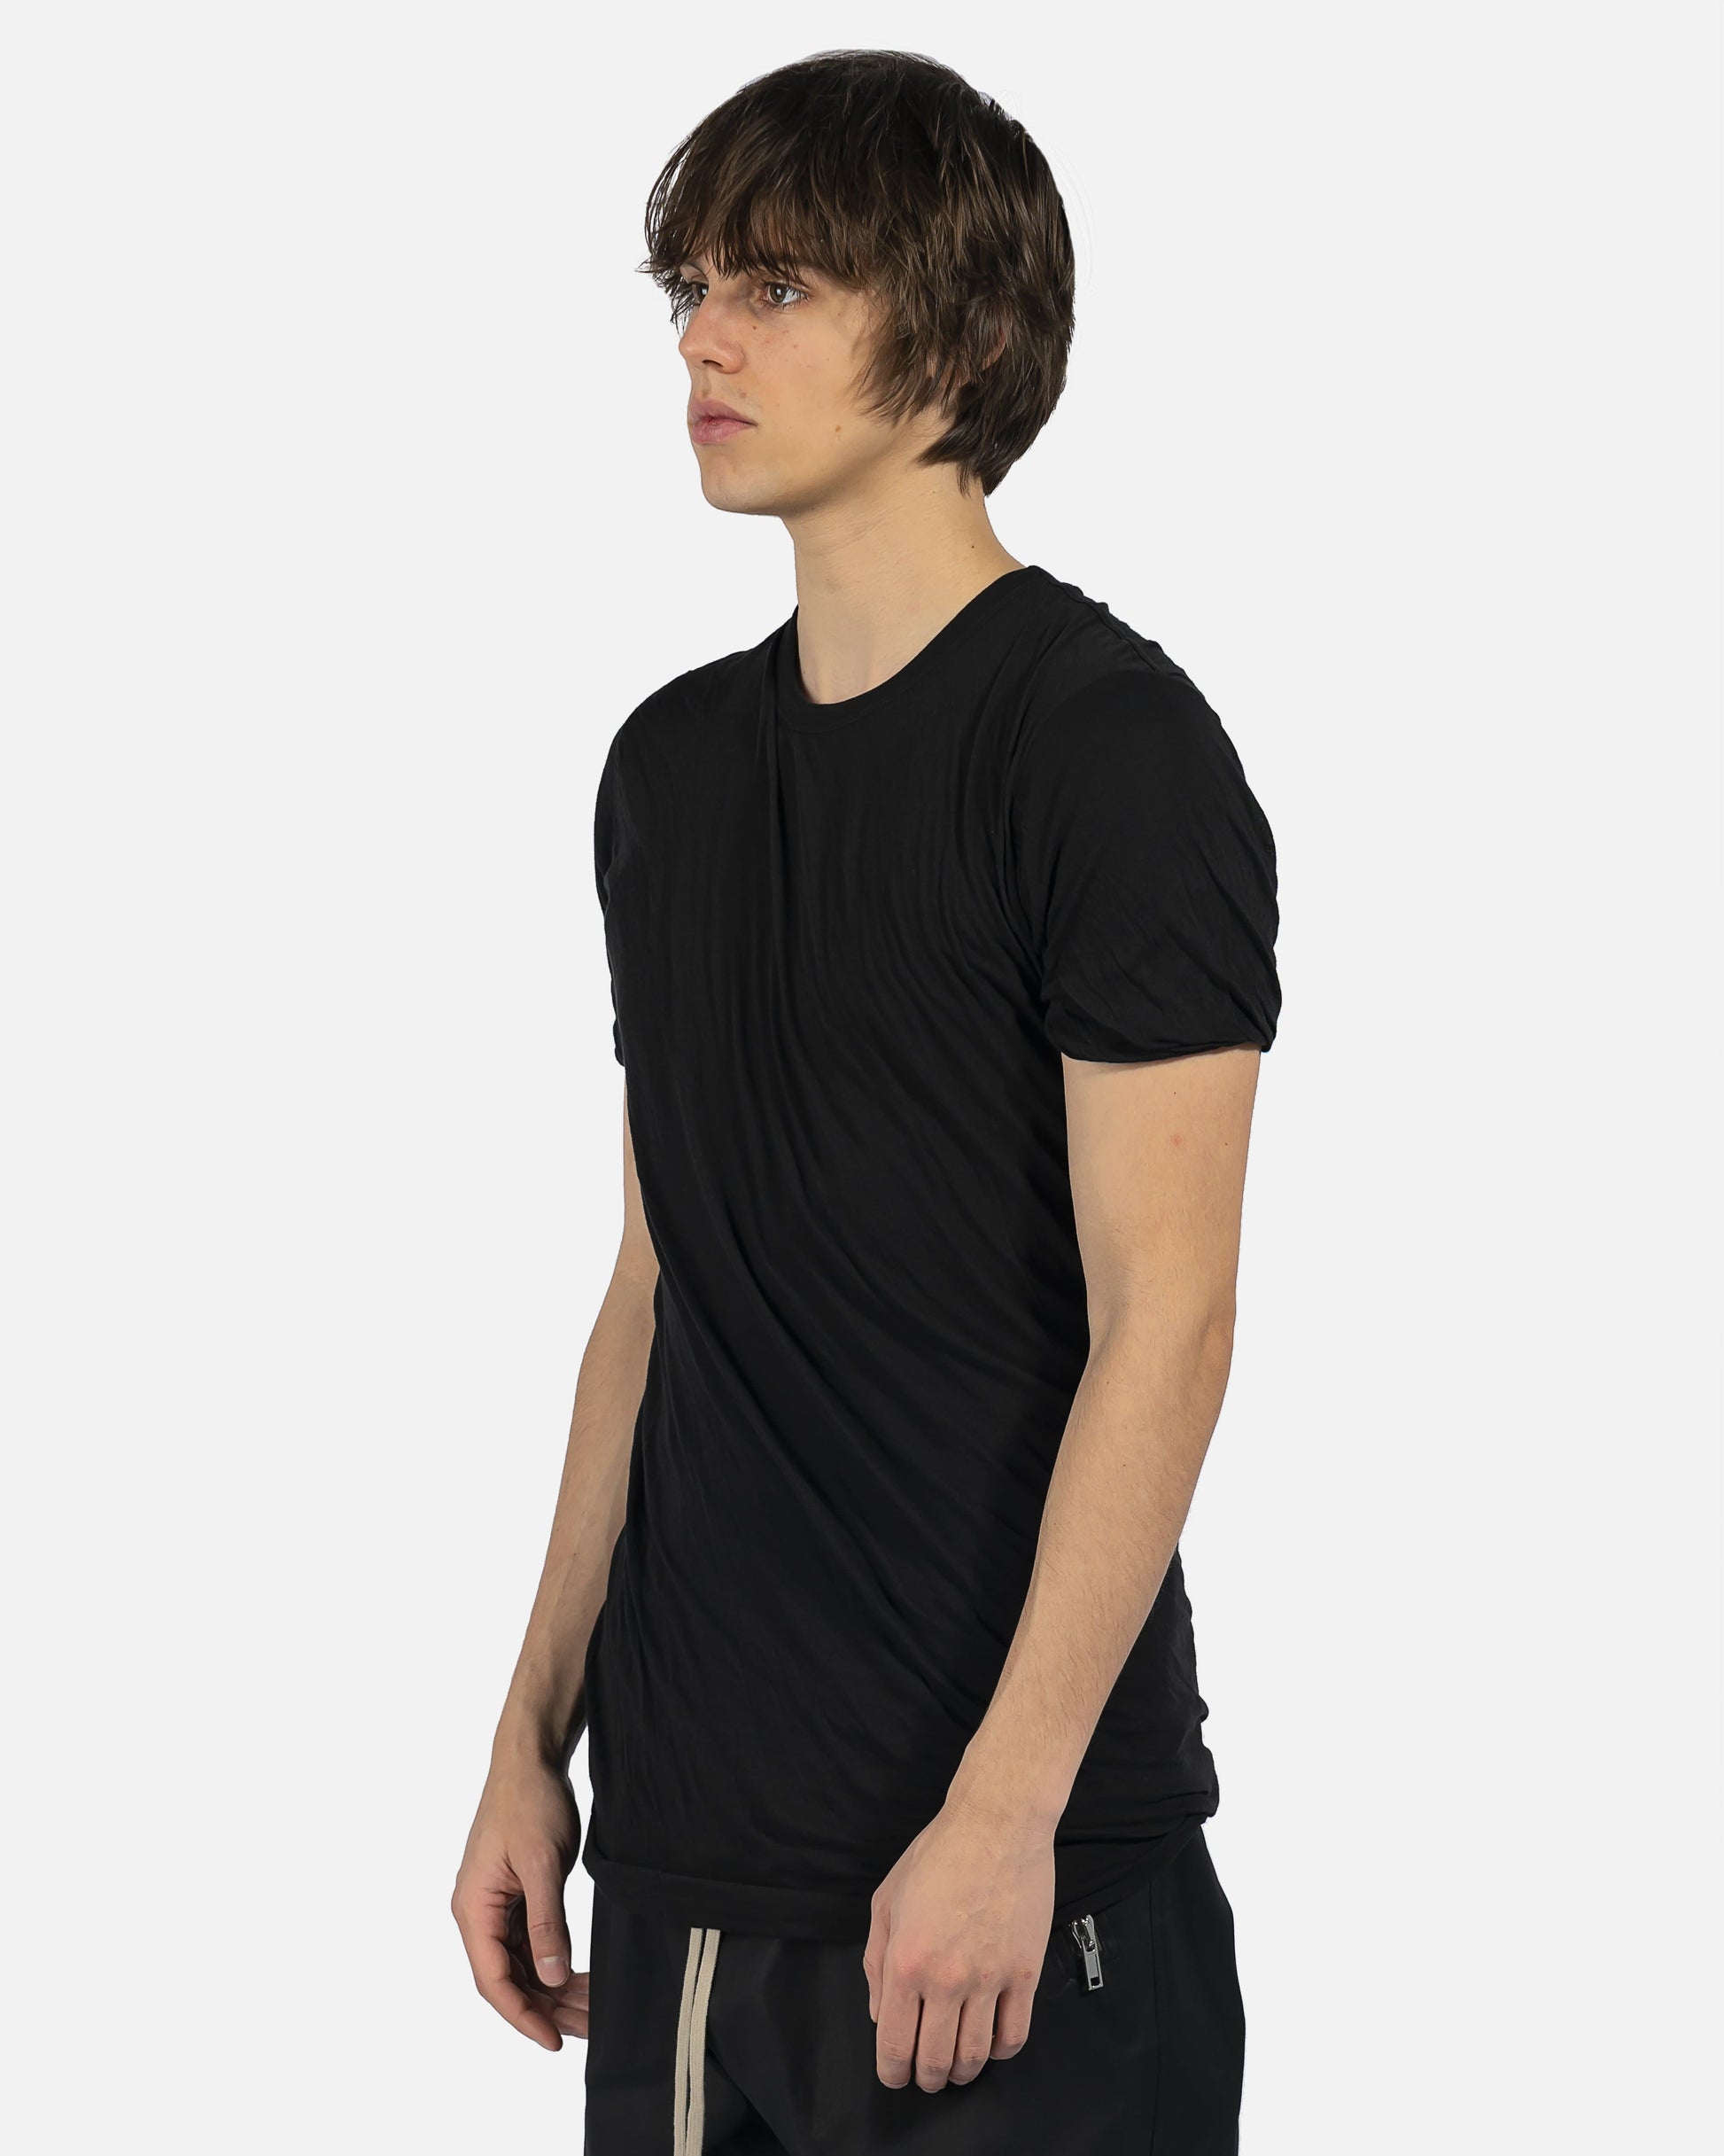 Rick Owens Men's T-Shirts Double Layer Shortsleeve T-Shirt in Black